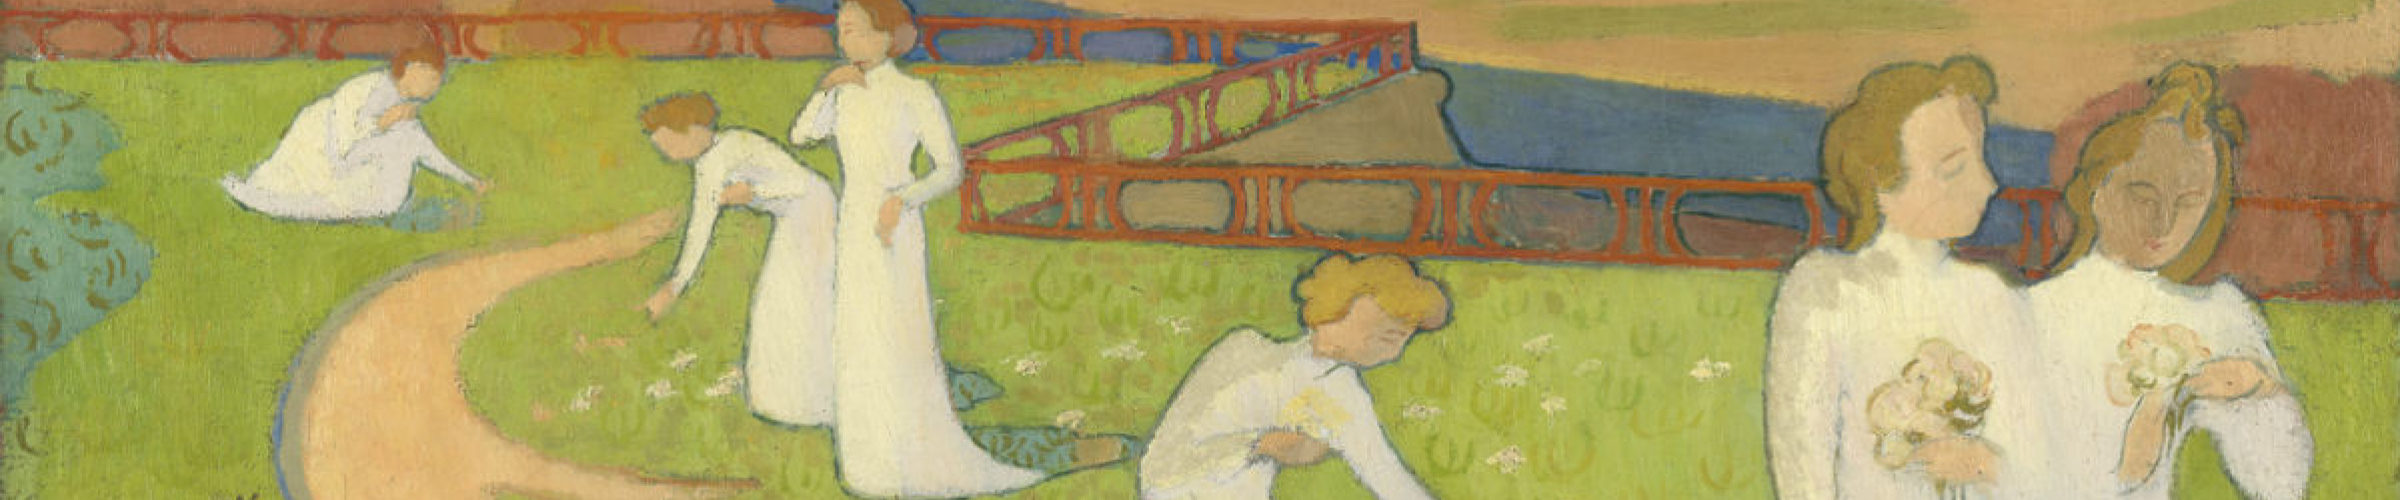 Maurice Denis, April (Panel for a young girl’s room), 1892, oil on canvas, 38 x 61.3 cm (Kröller-Müller Museum, Otterlo)